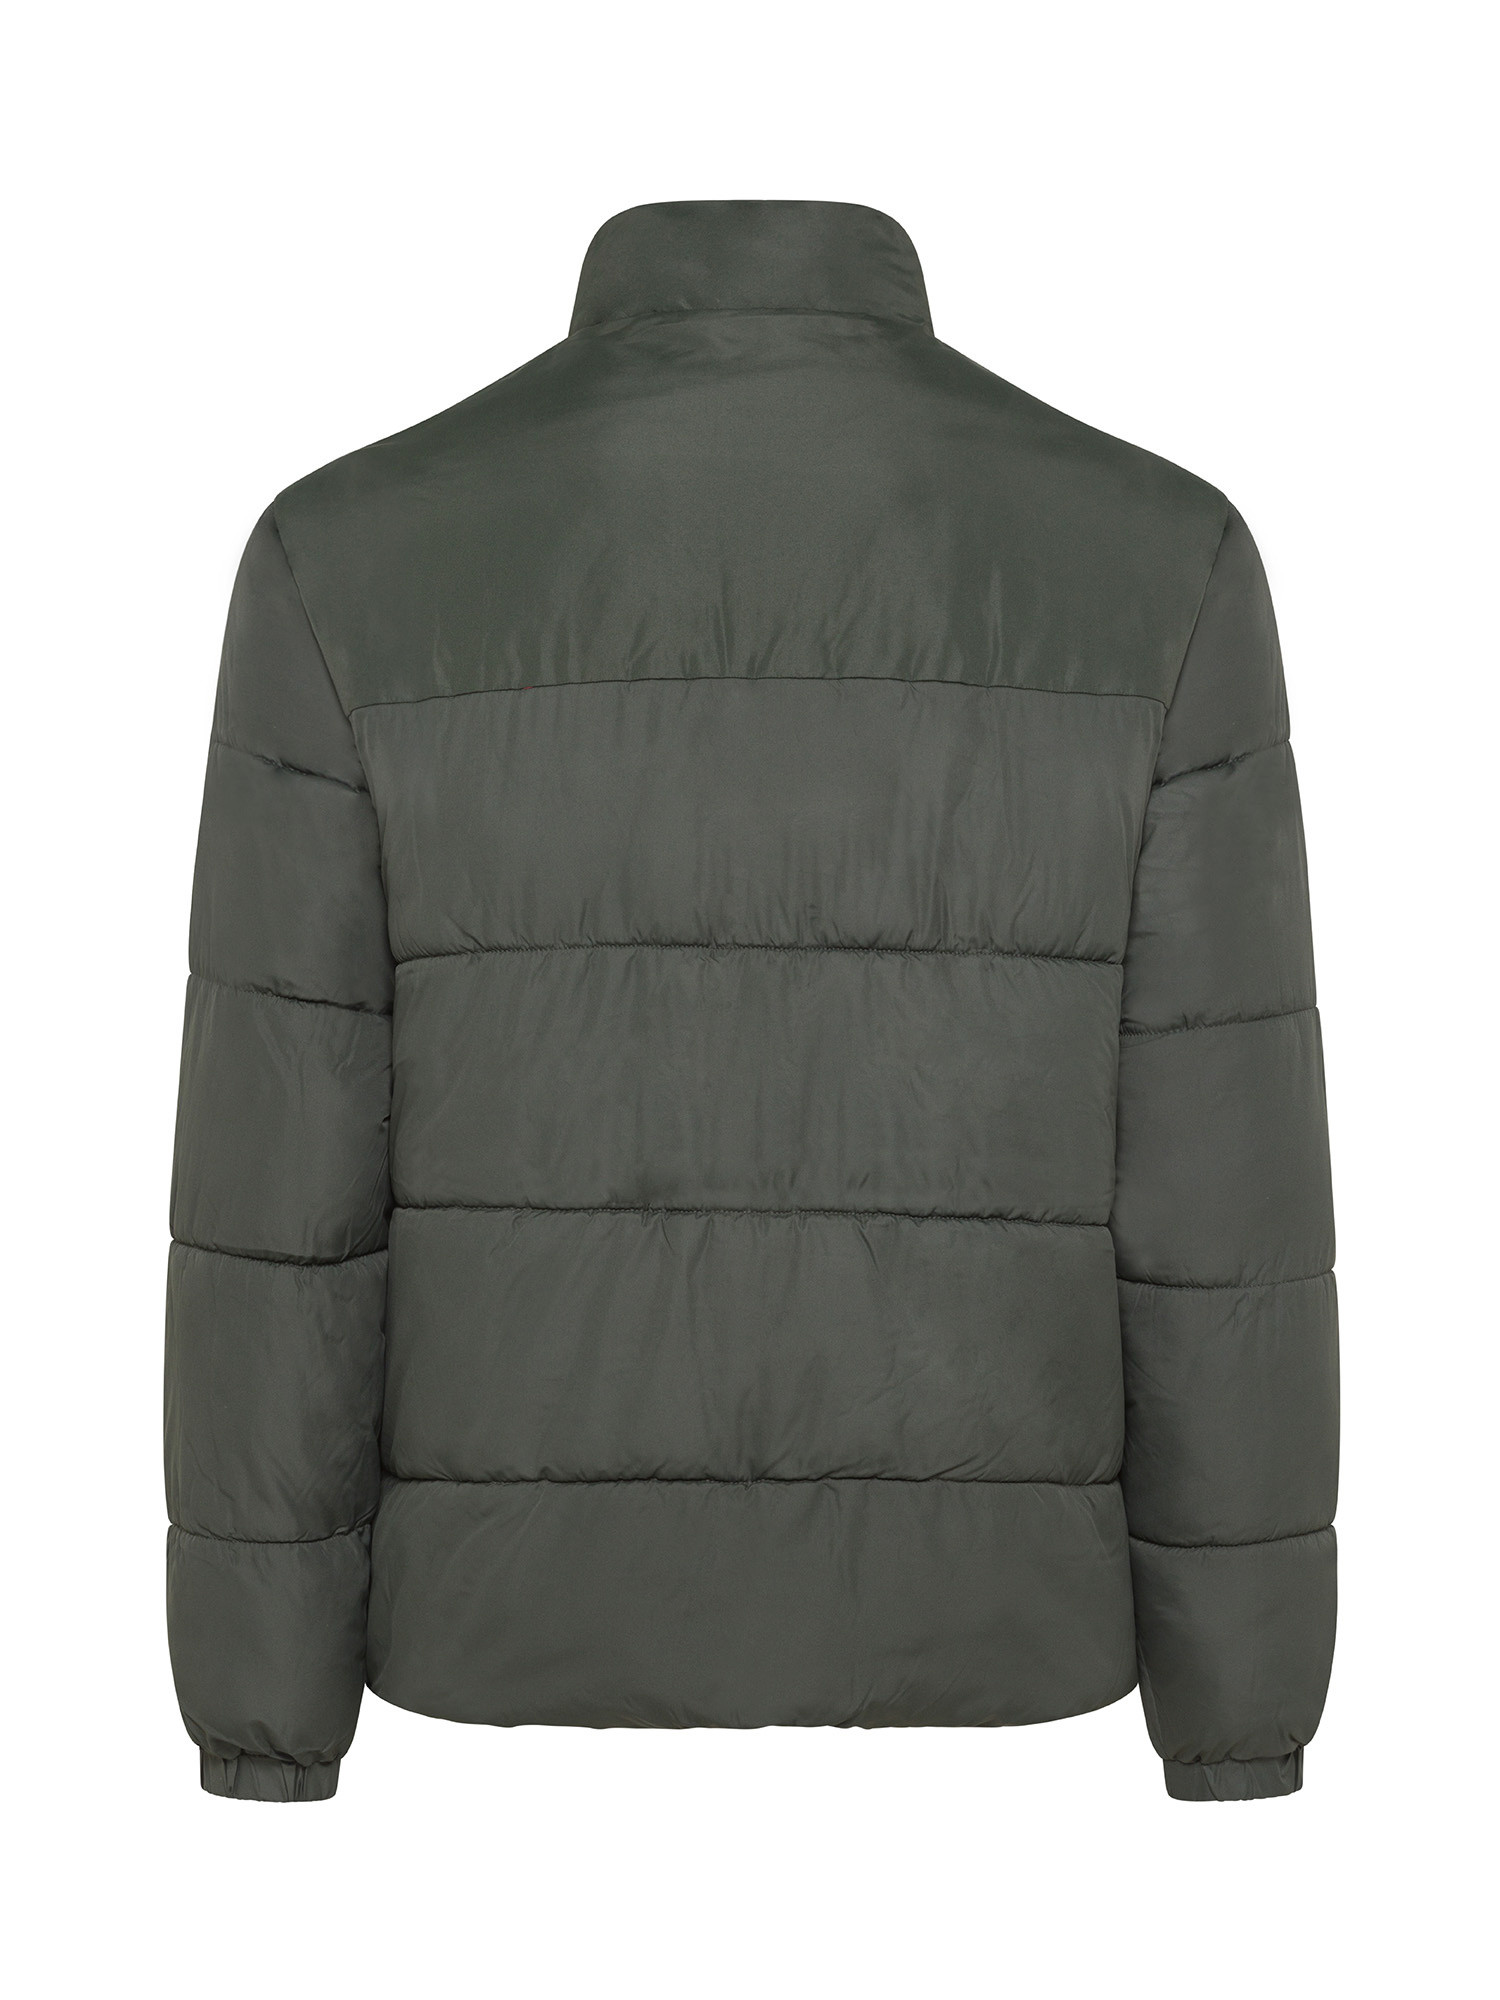 Down jacket with pockets, Dark Green, large image number 1